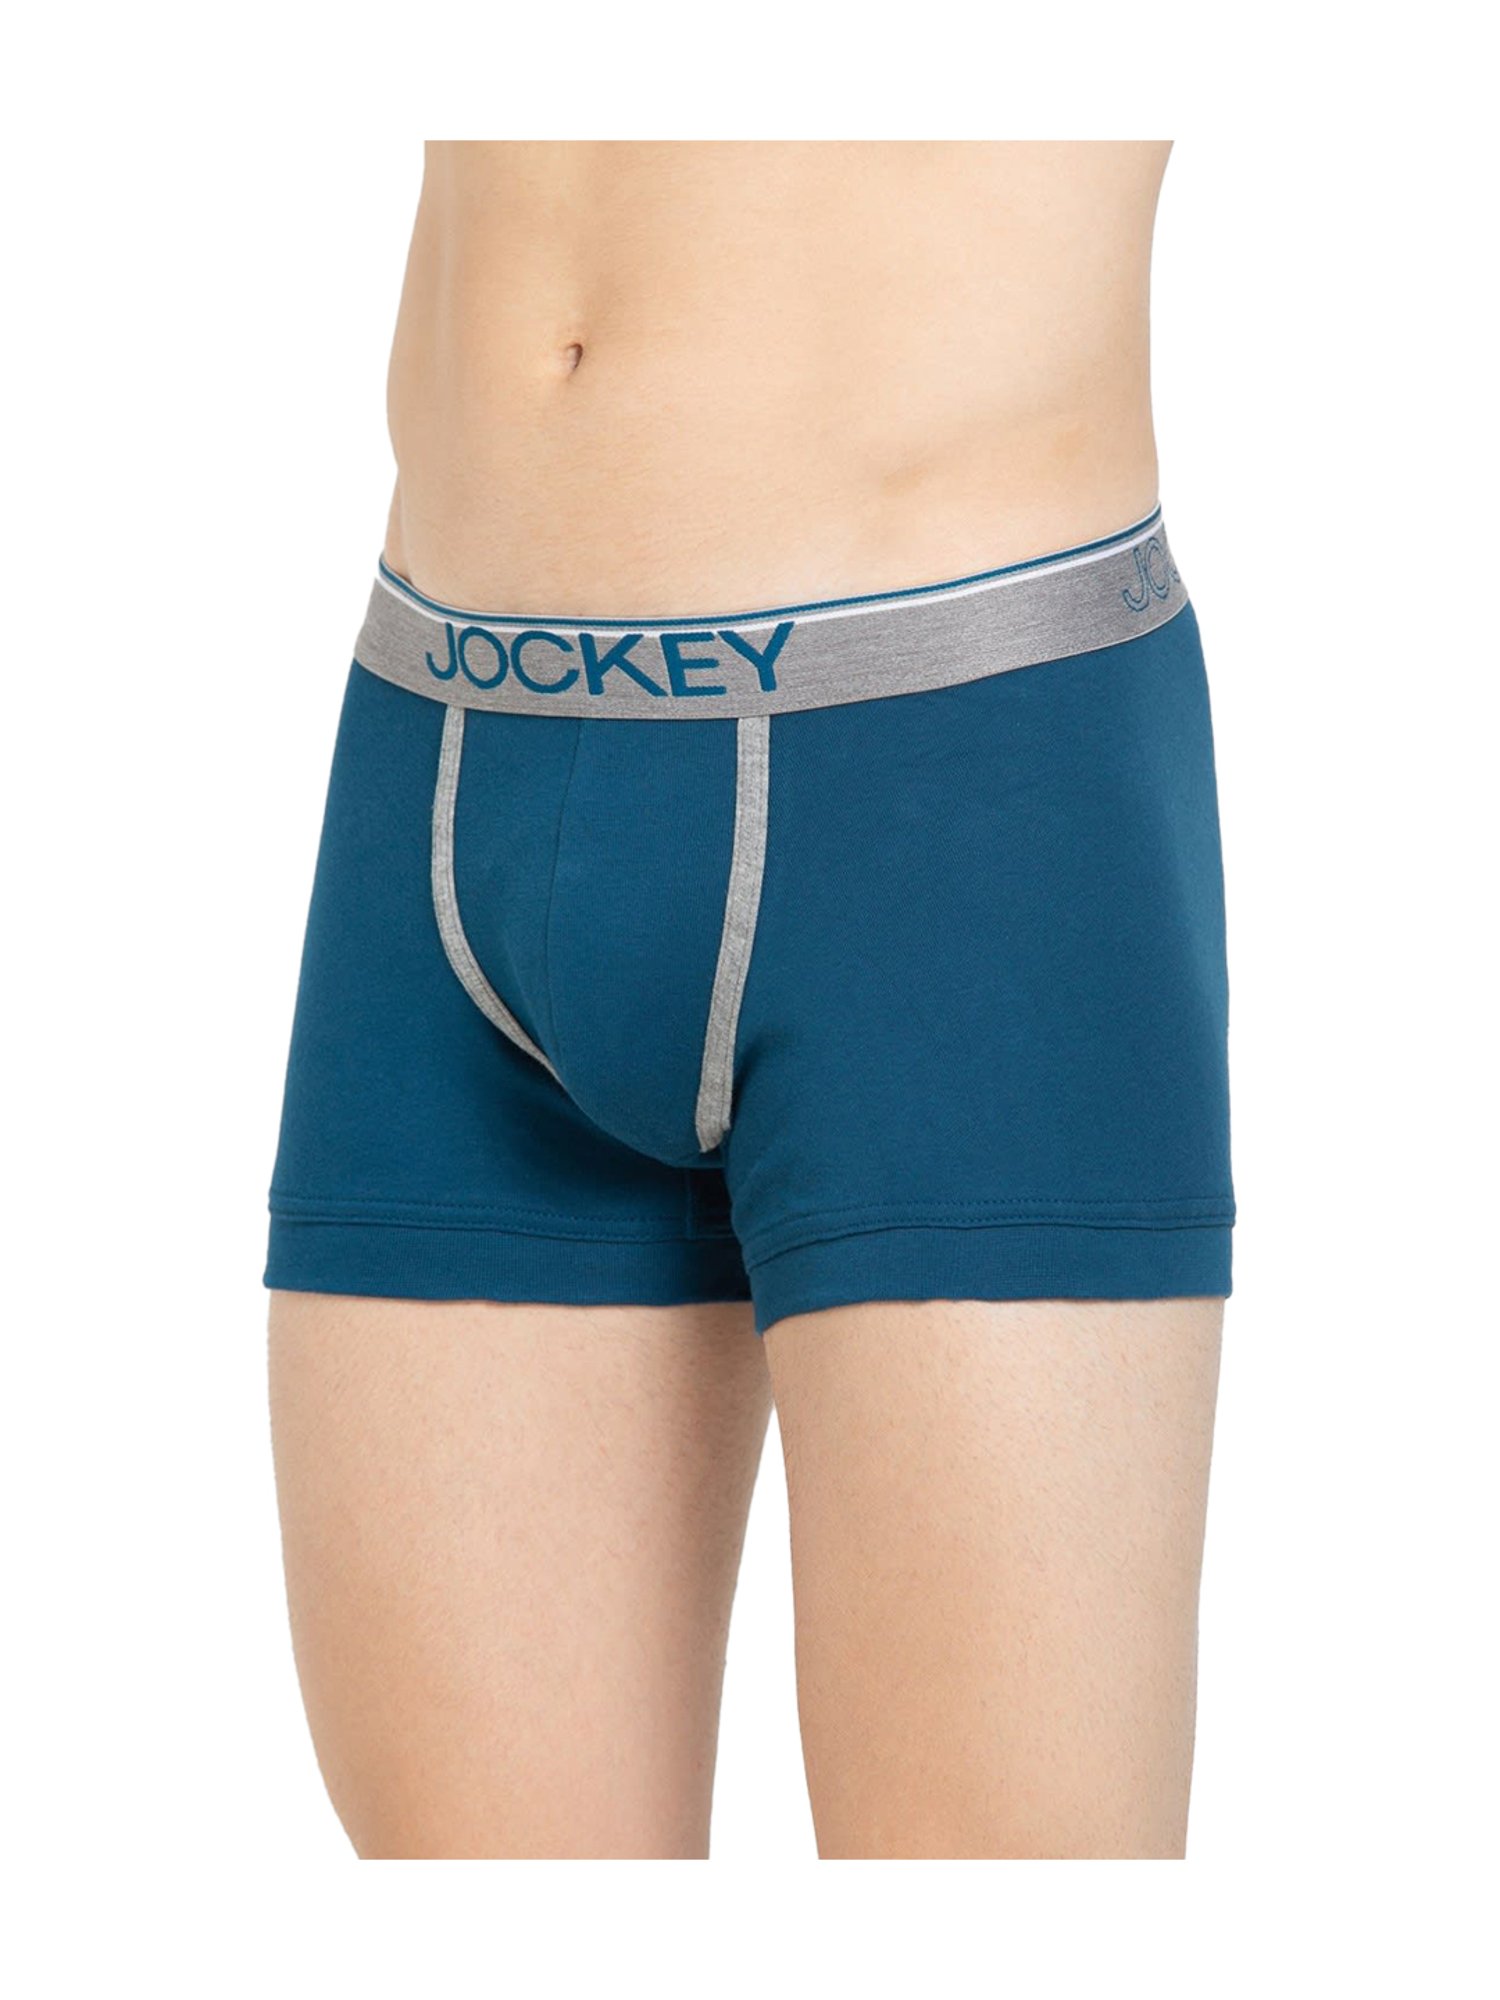 JOCKEY US60 Ultra soft Mens Trunks with Double layer Contoured